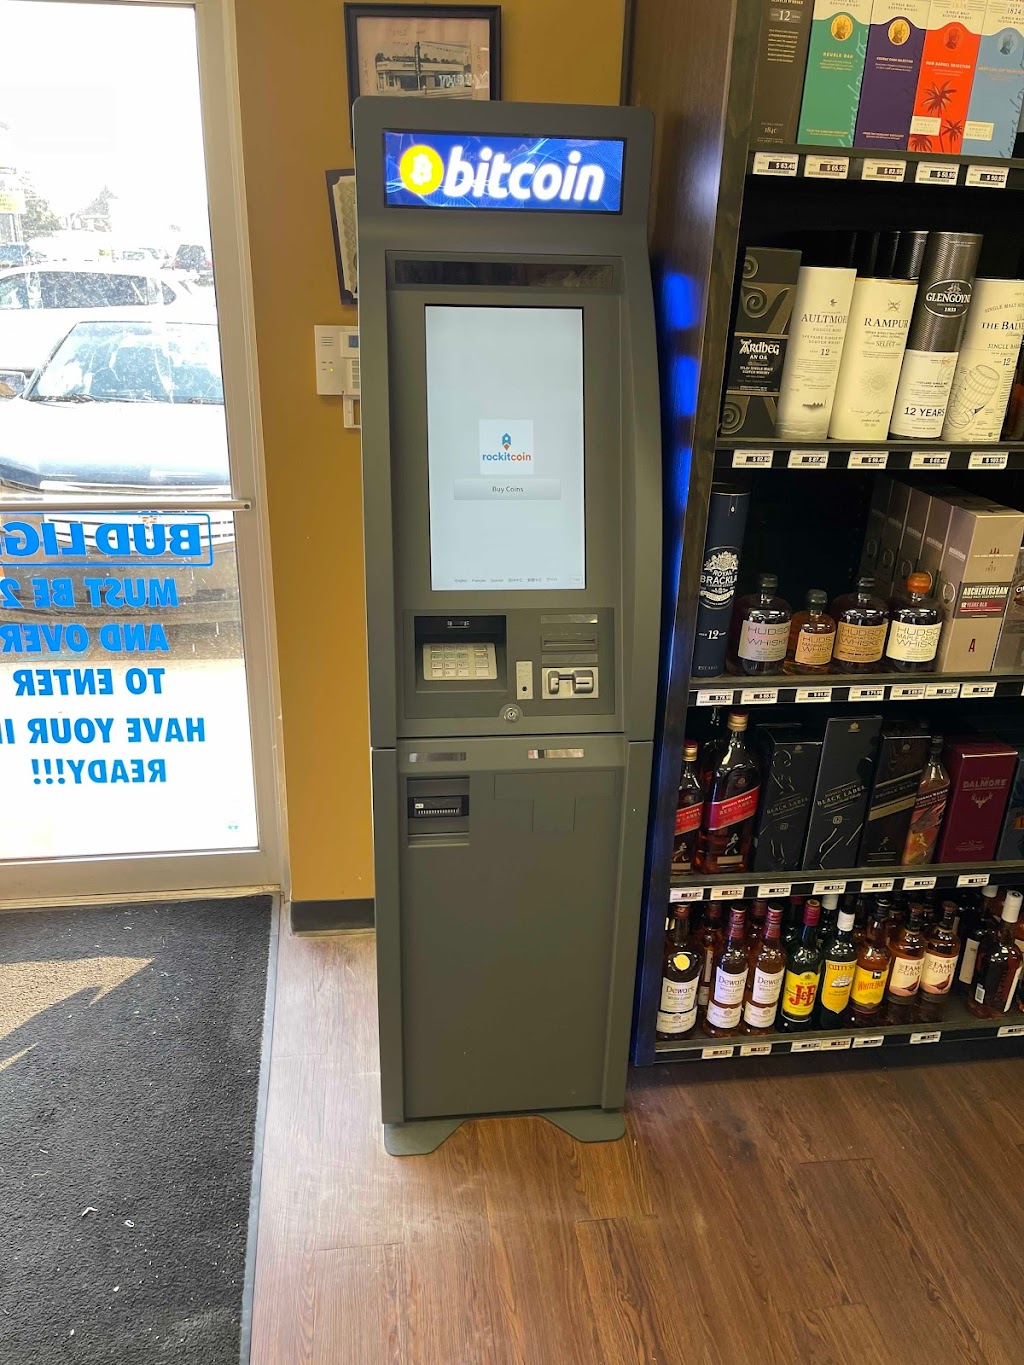 RockItCoin Bitcoin ATM | 175 N Broadway, Pennsville Township, NJ 08070 | Phone: (888) 702-5221